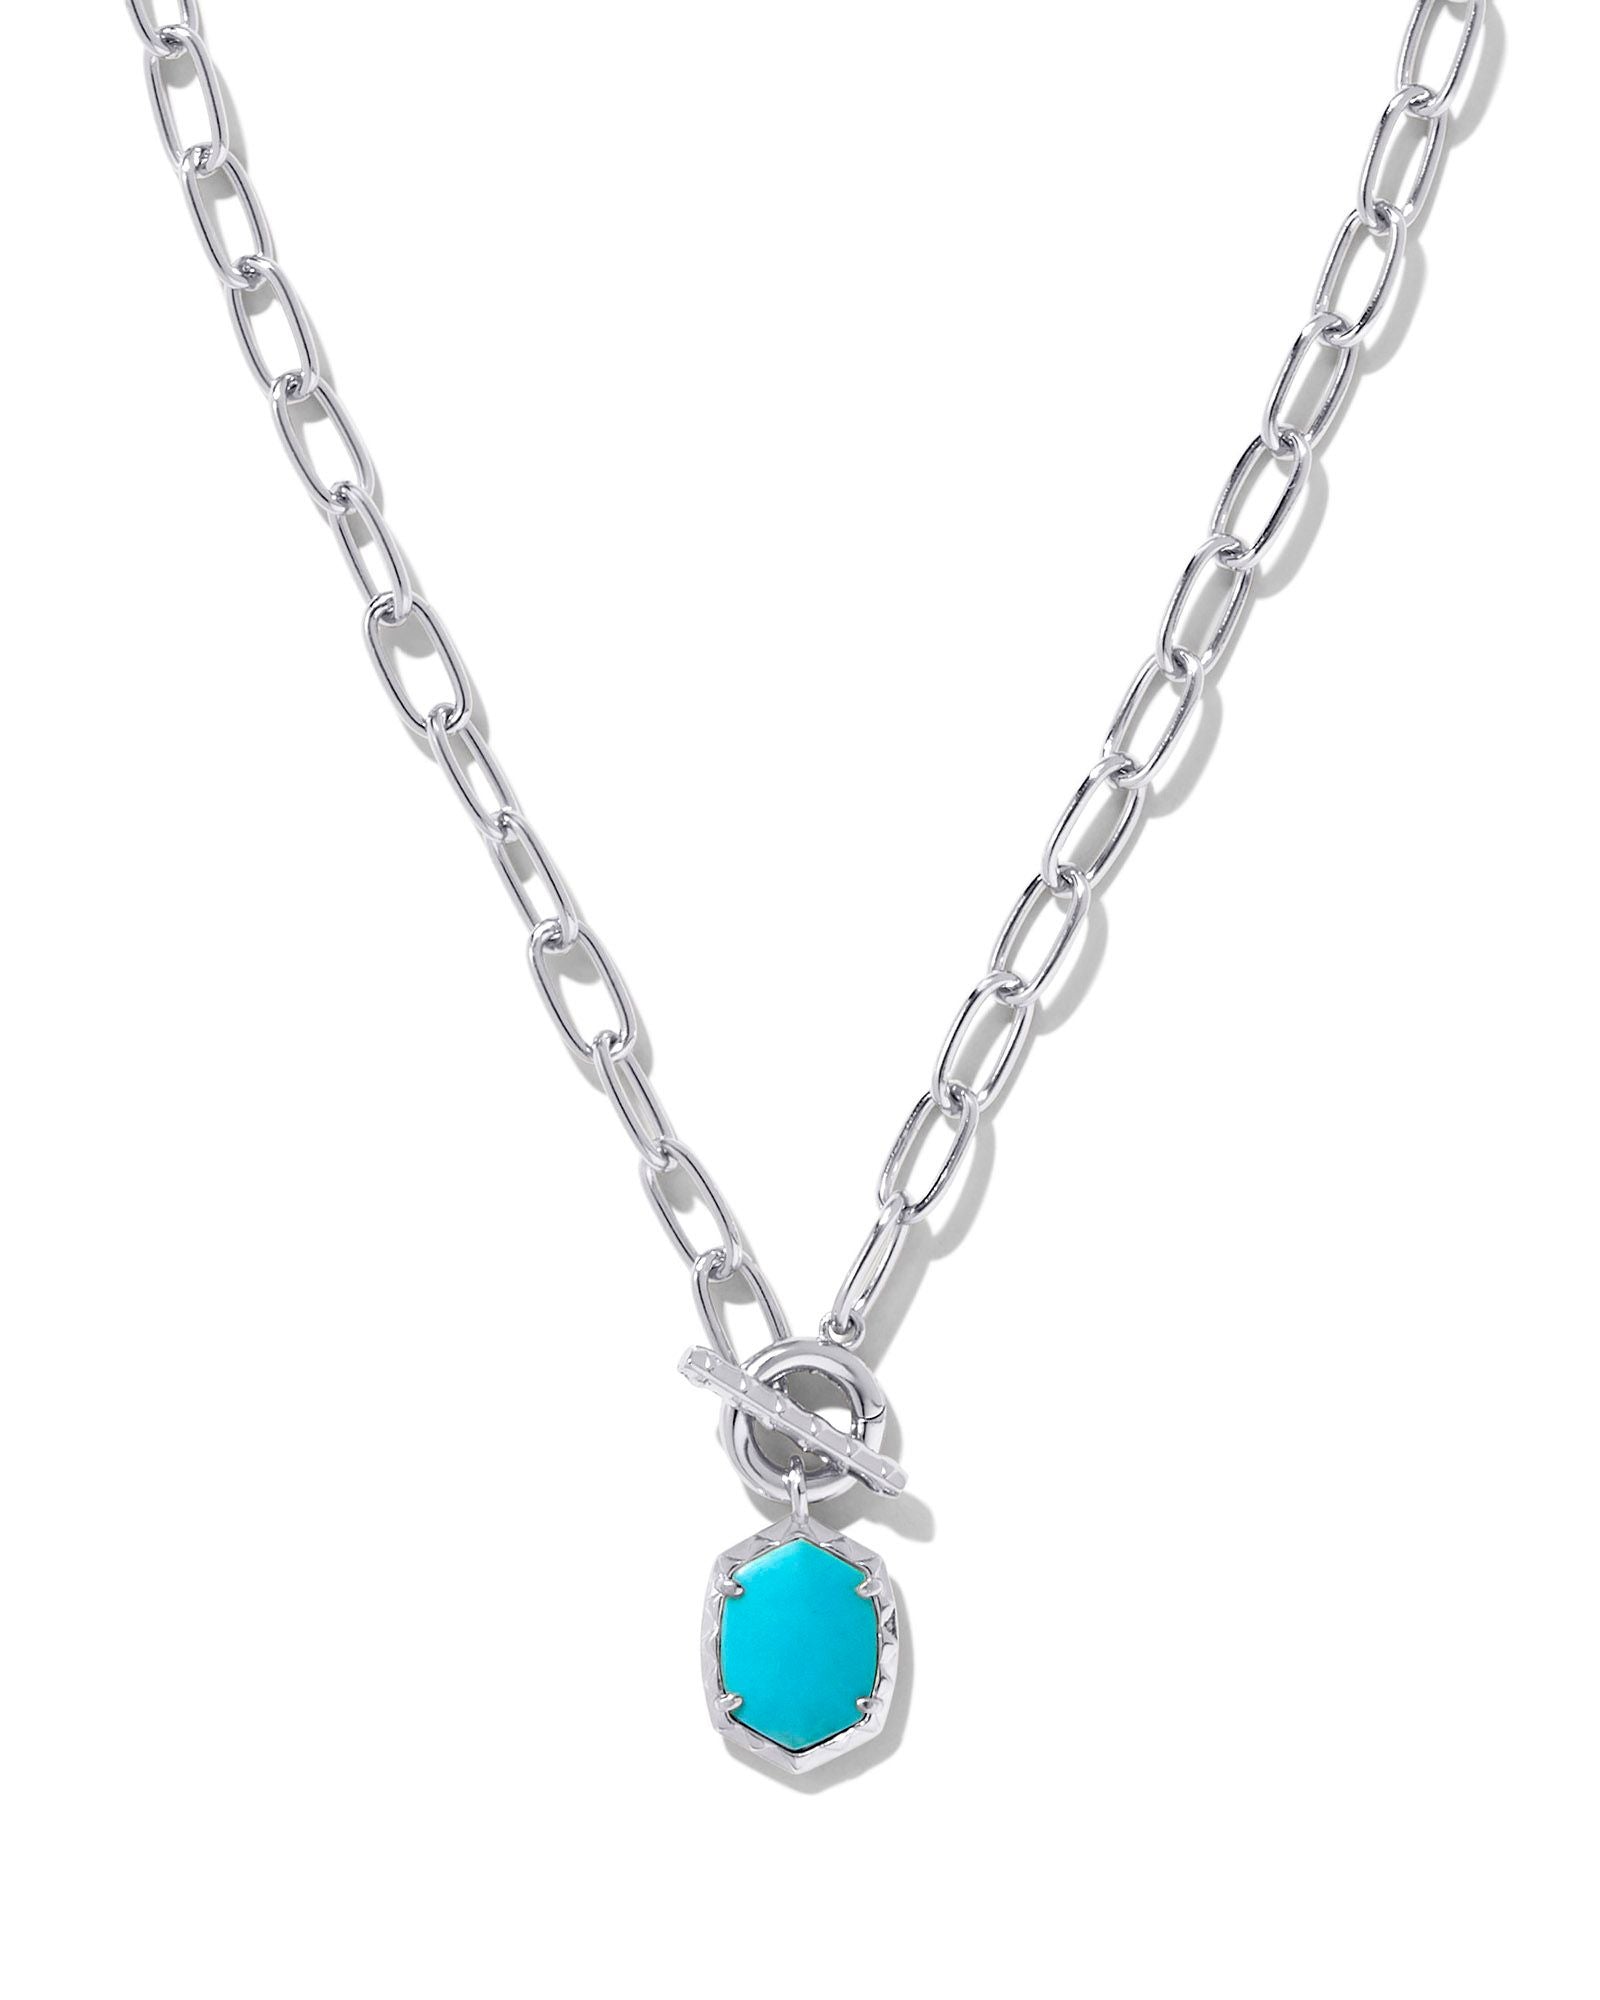 Daphne Link Chain Necklace in Rhodium Variegated Turquoise